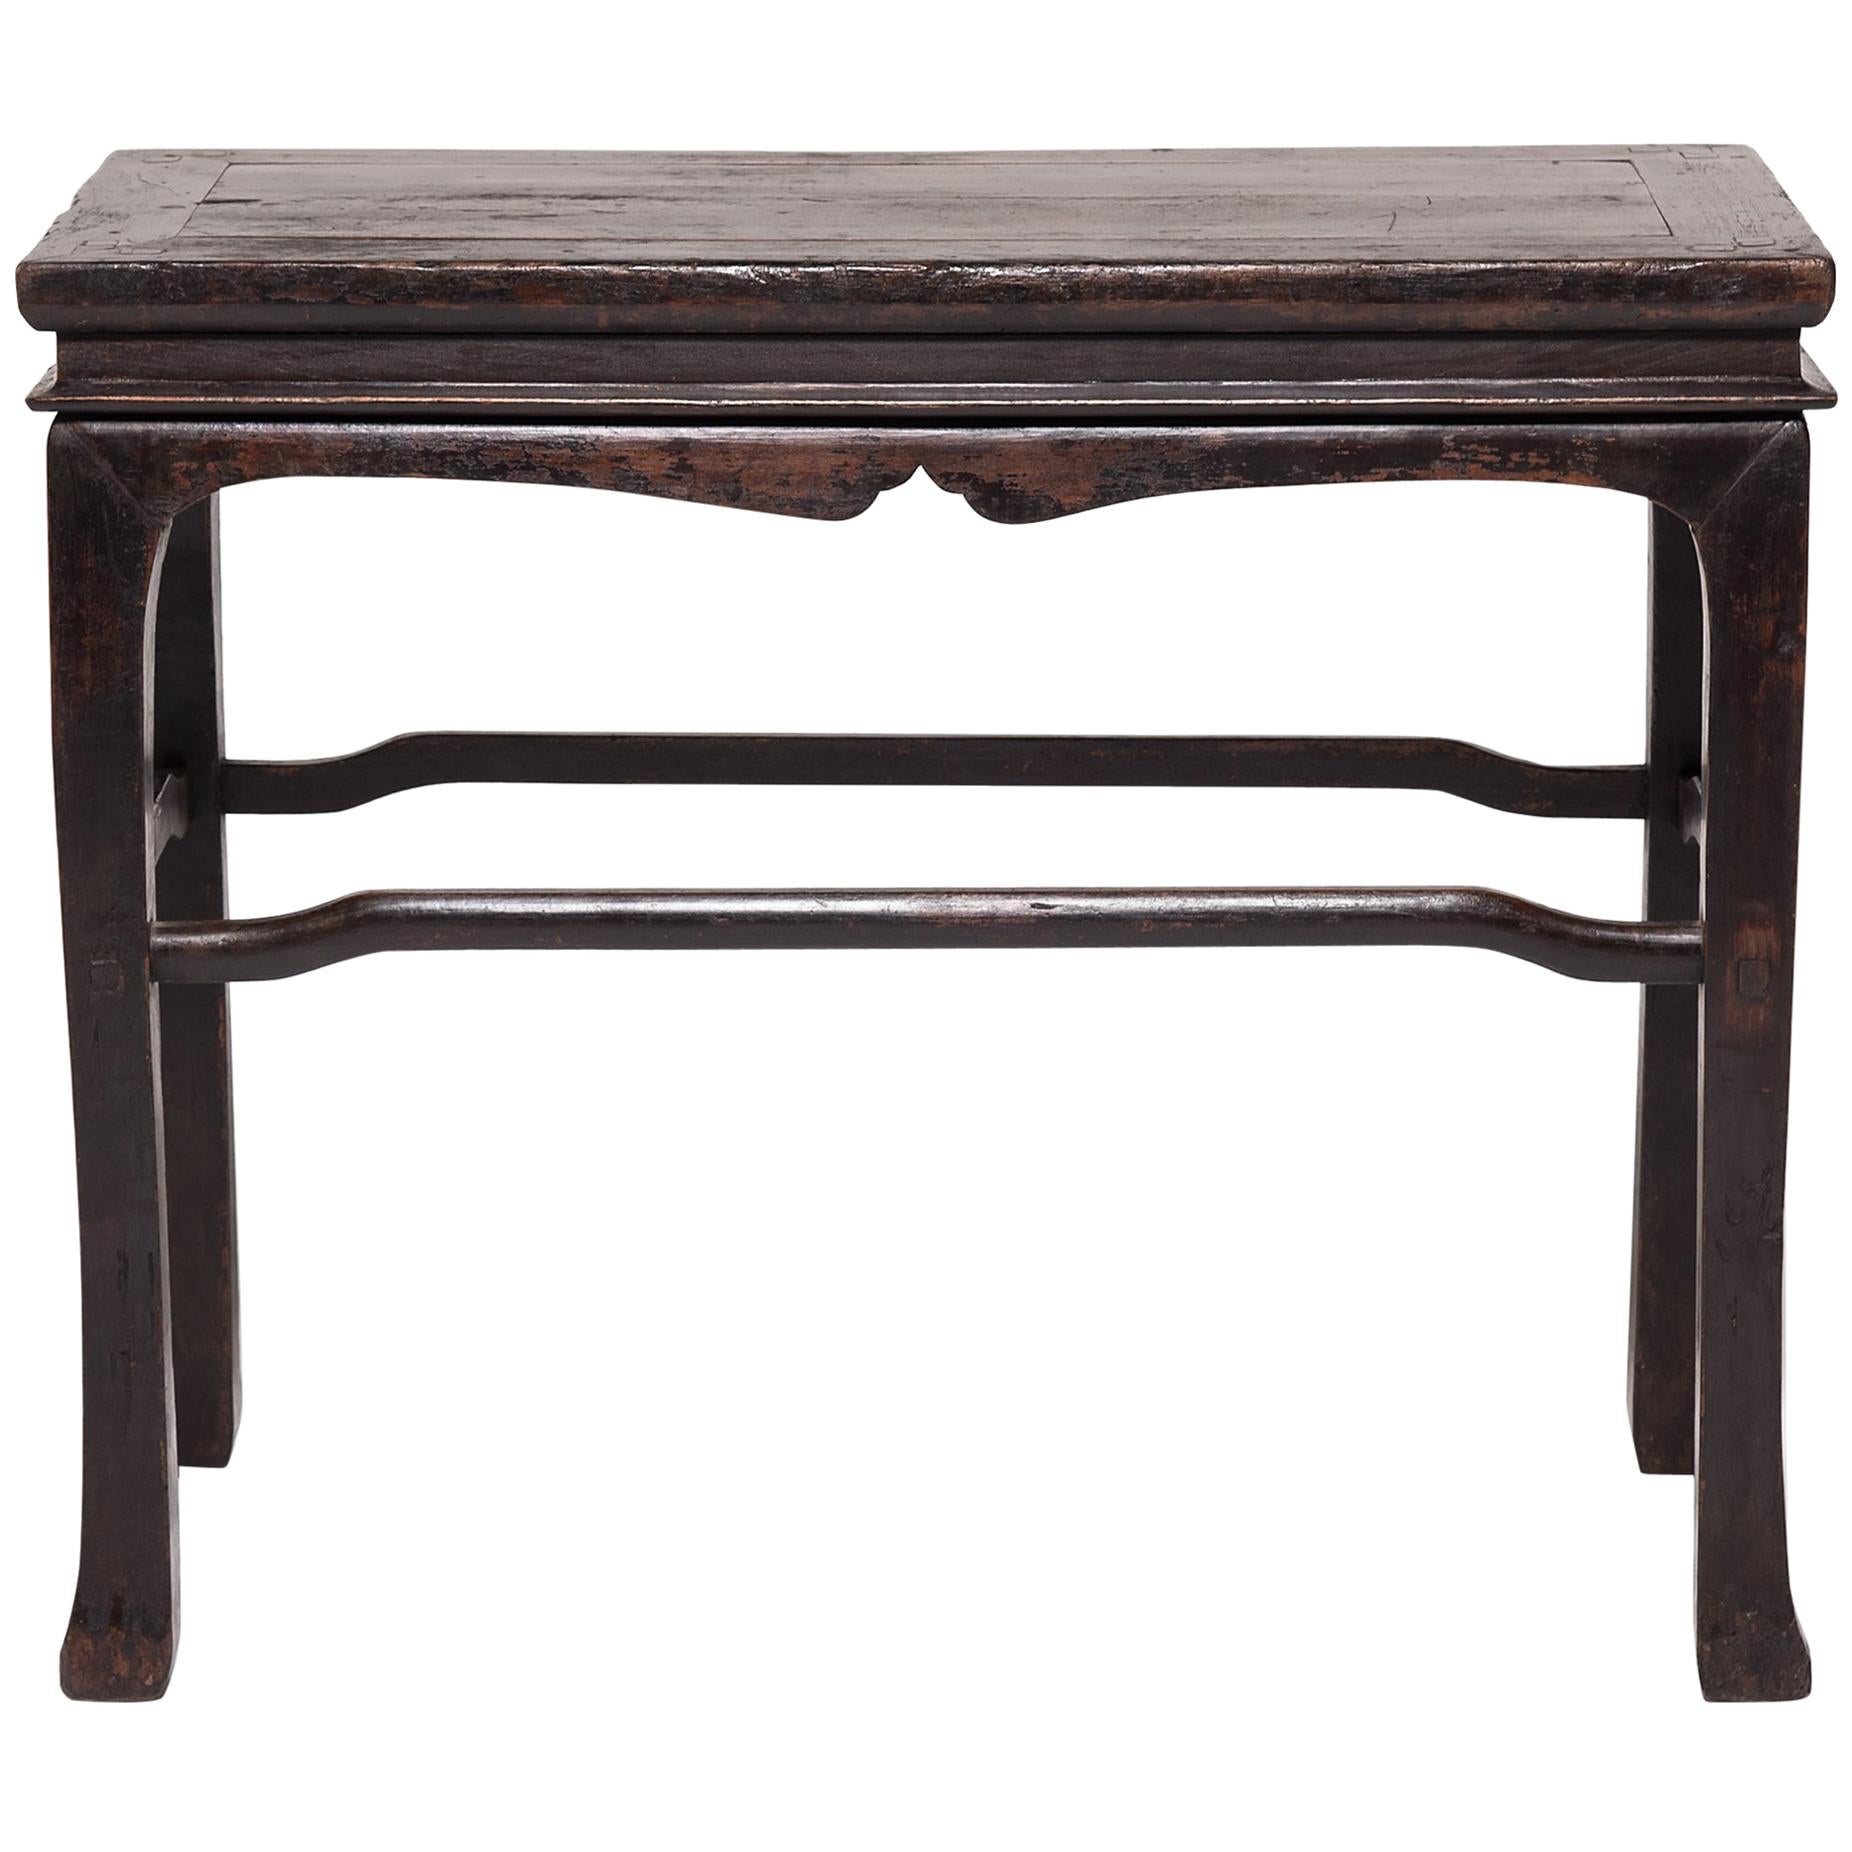 Console Table with Humpback Stretchers